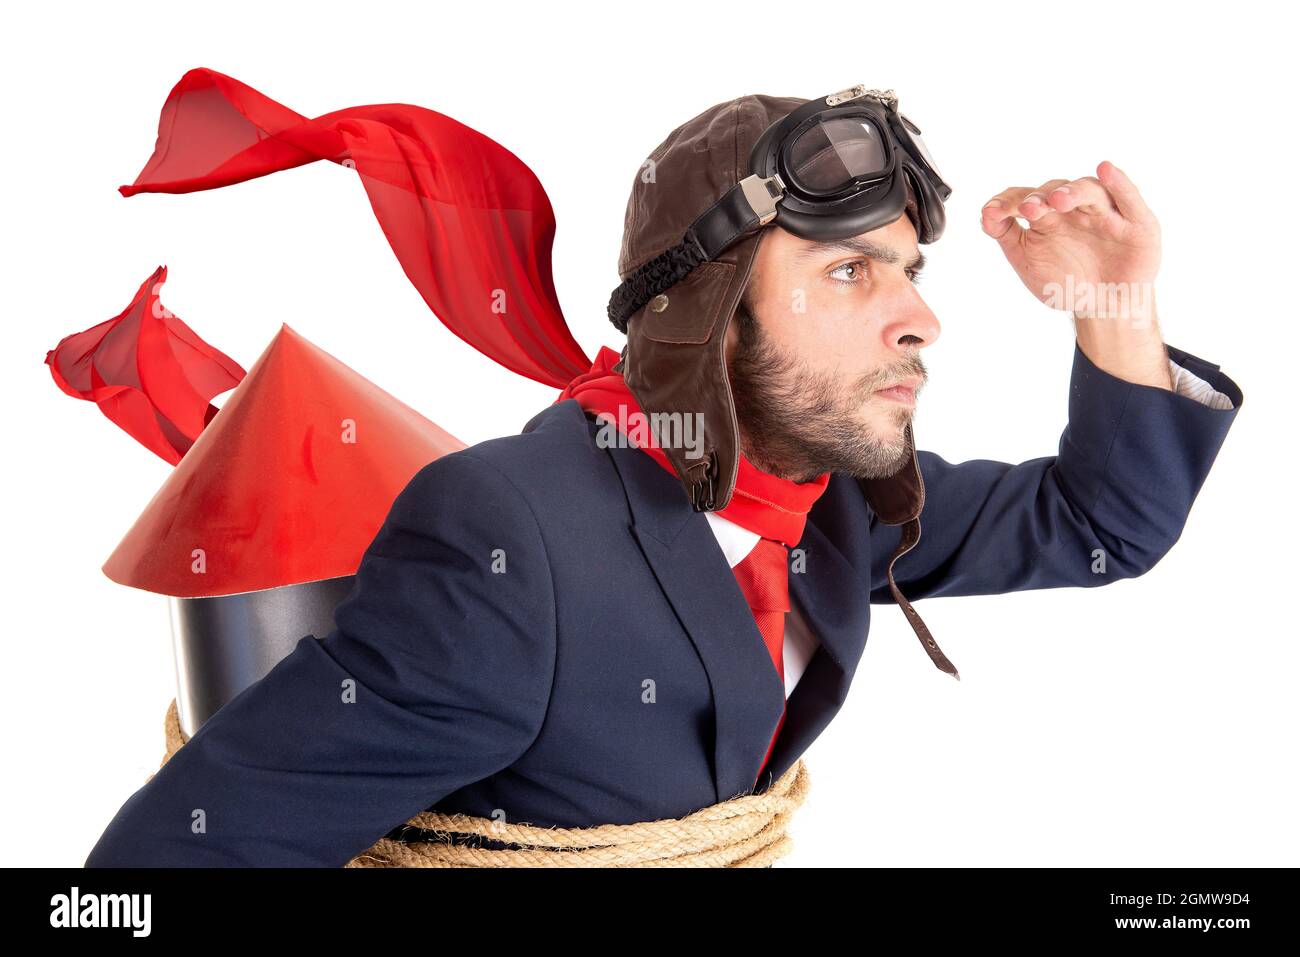 Businessman with homemade rocket and googles ready for a challenge Stock Photo